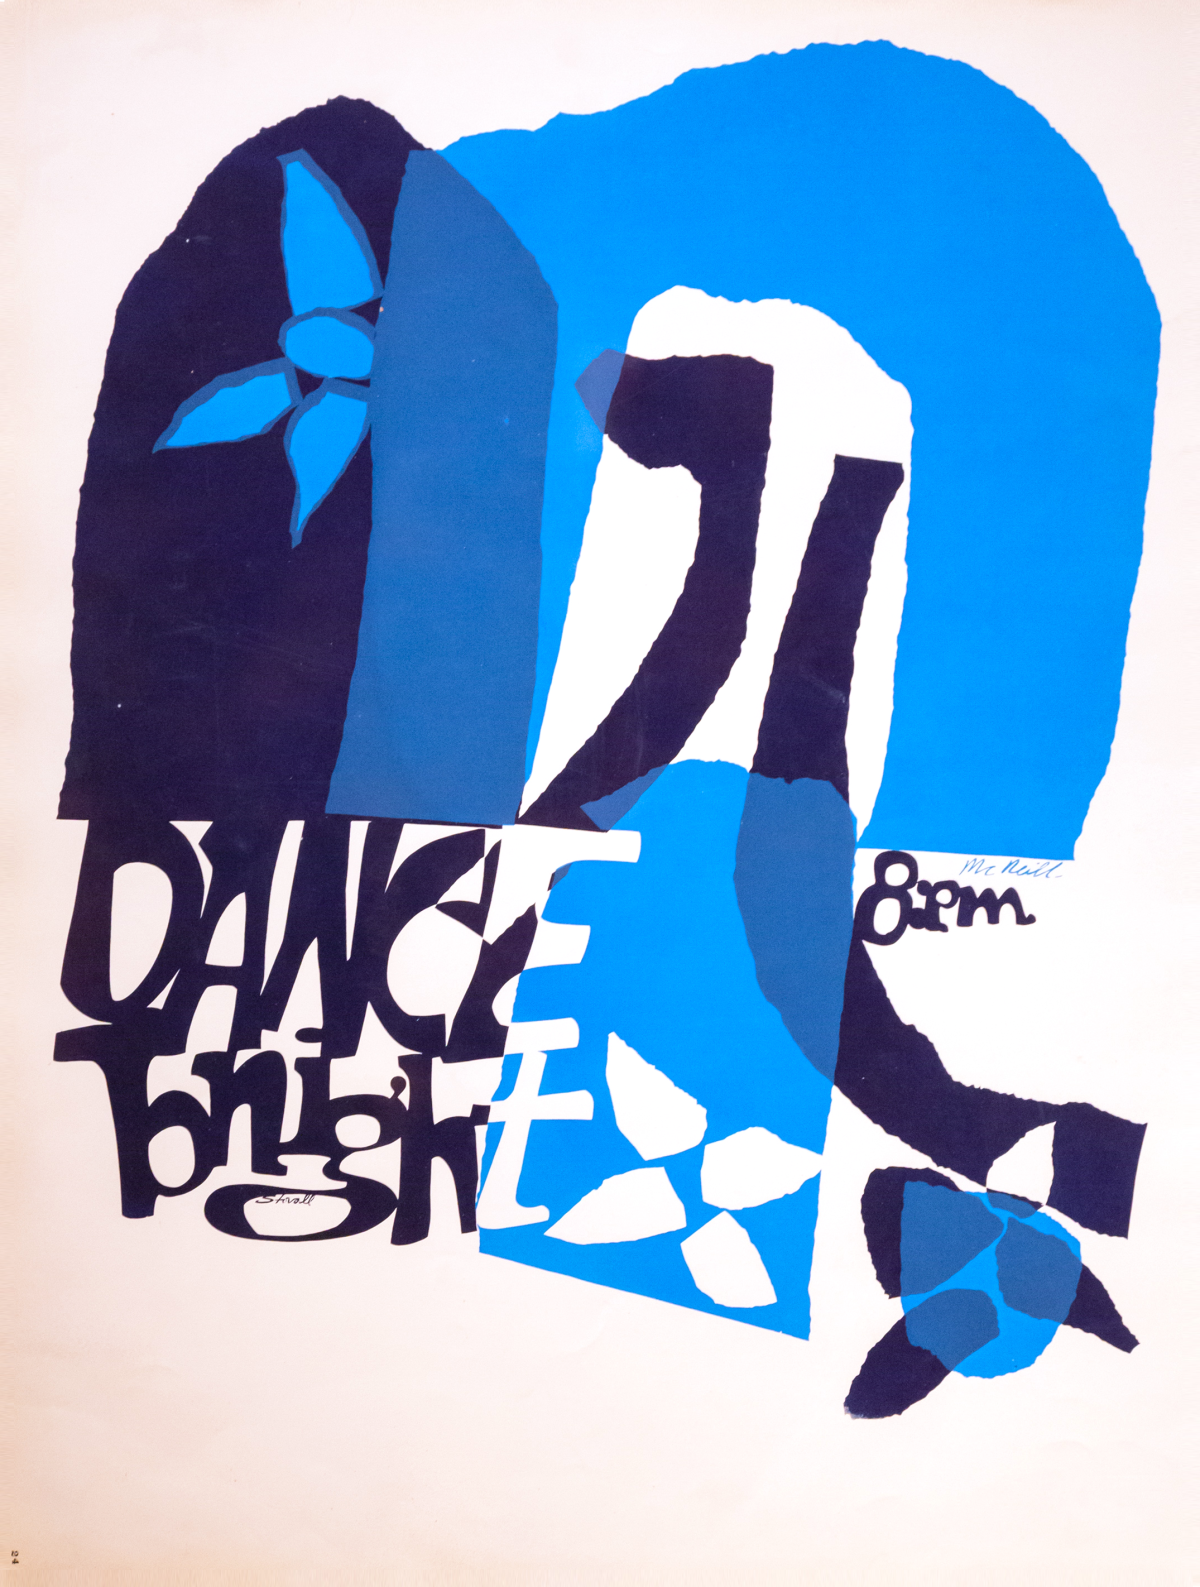 Poster image reading "Dance tonight" and blue abstract shapes